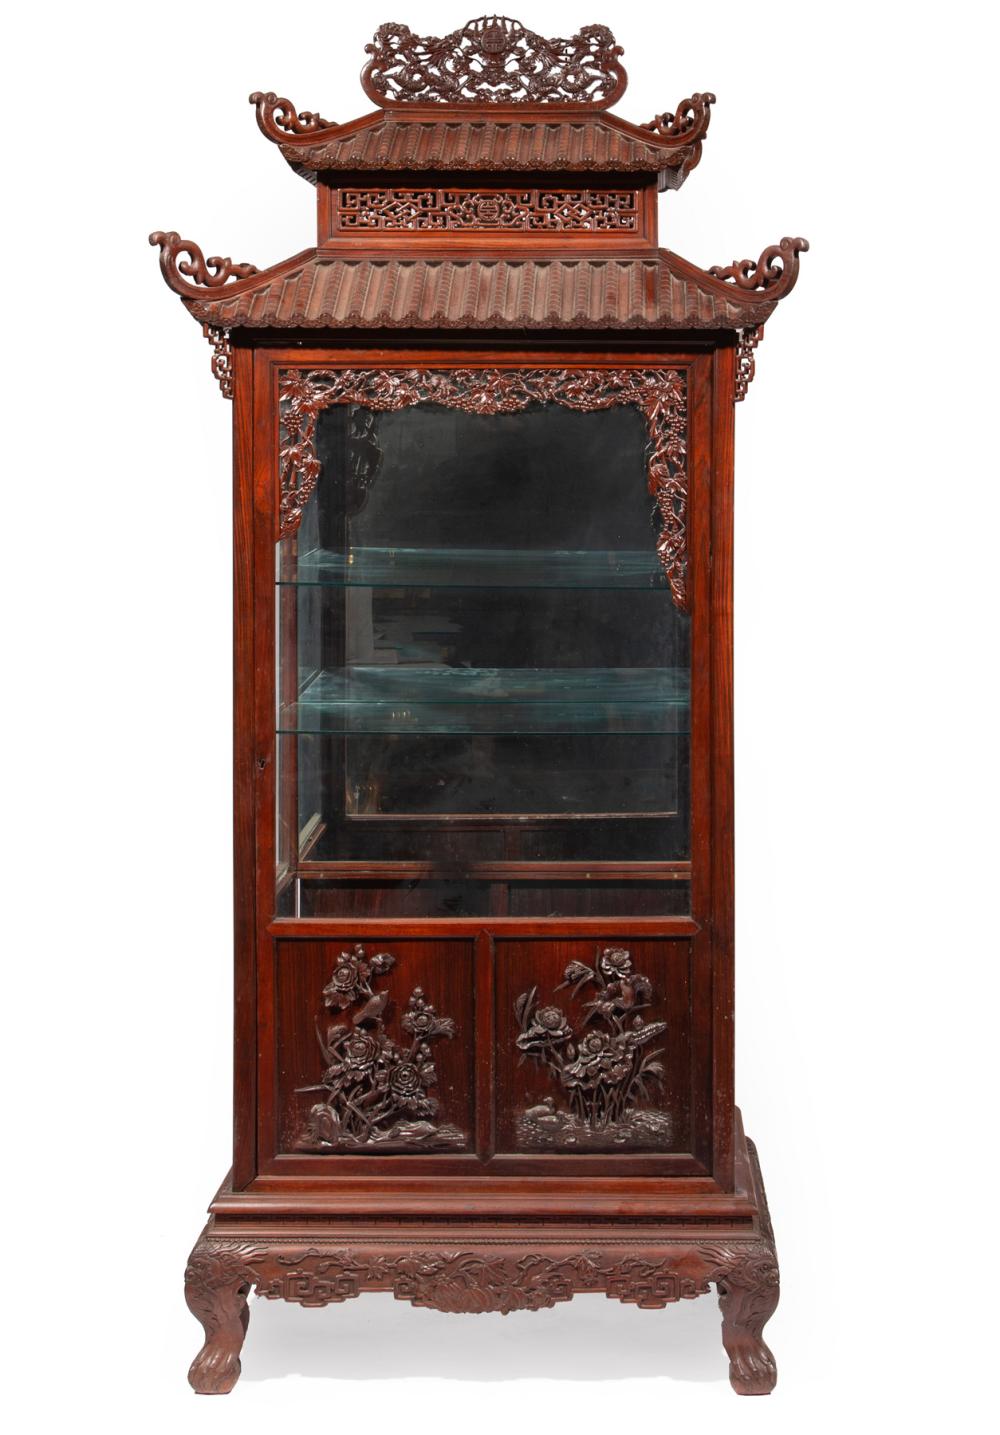 ANTIQUE CHINESE CARVED HARDWOOD